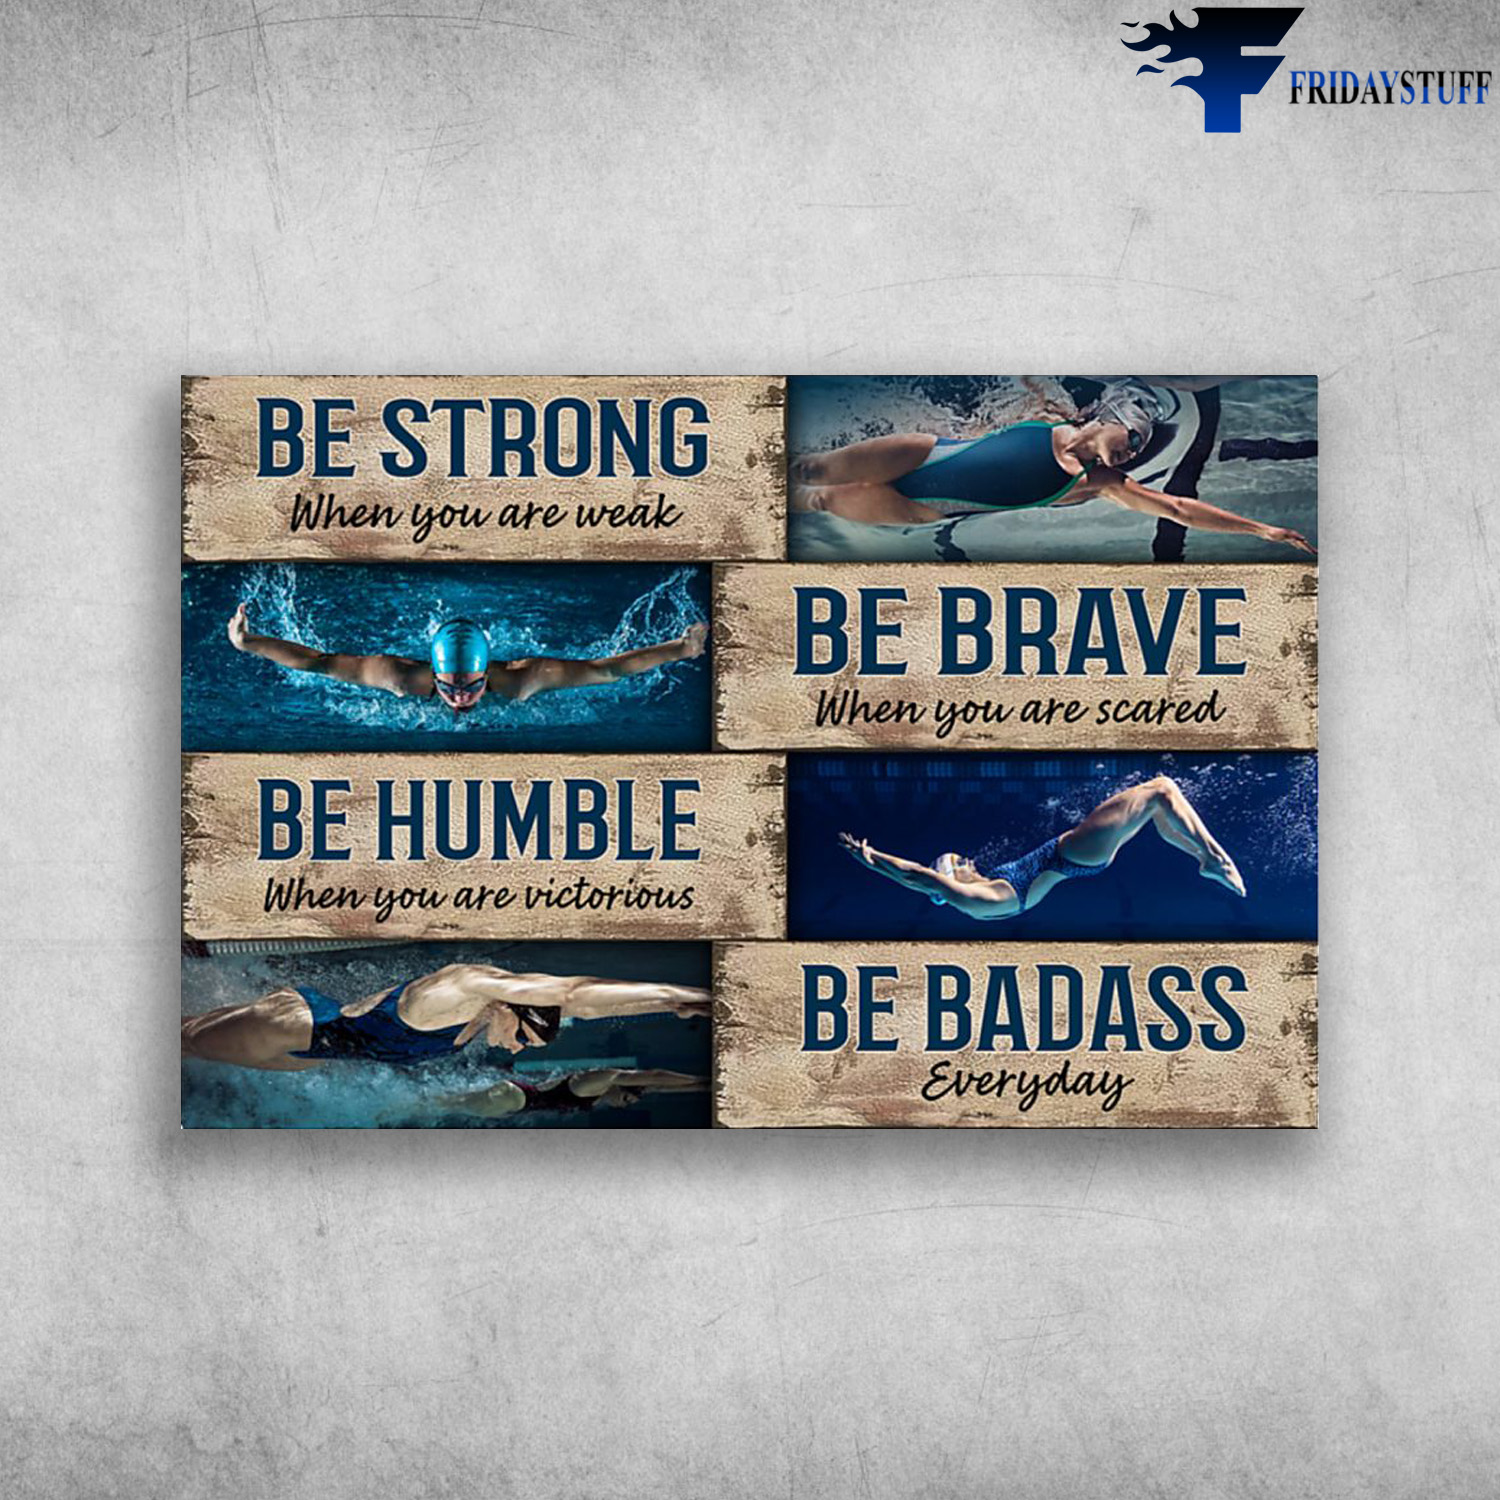 Swimming Athlete - Be Strong When You Are Weak, Be Brave When You Are Scared, Be Humble When You Are Victorious, Be Badass Everyday